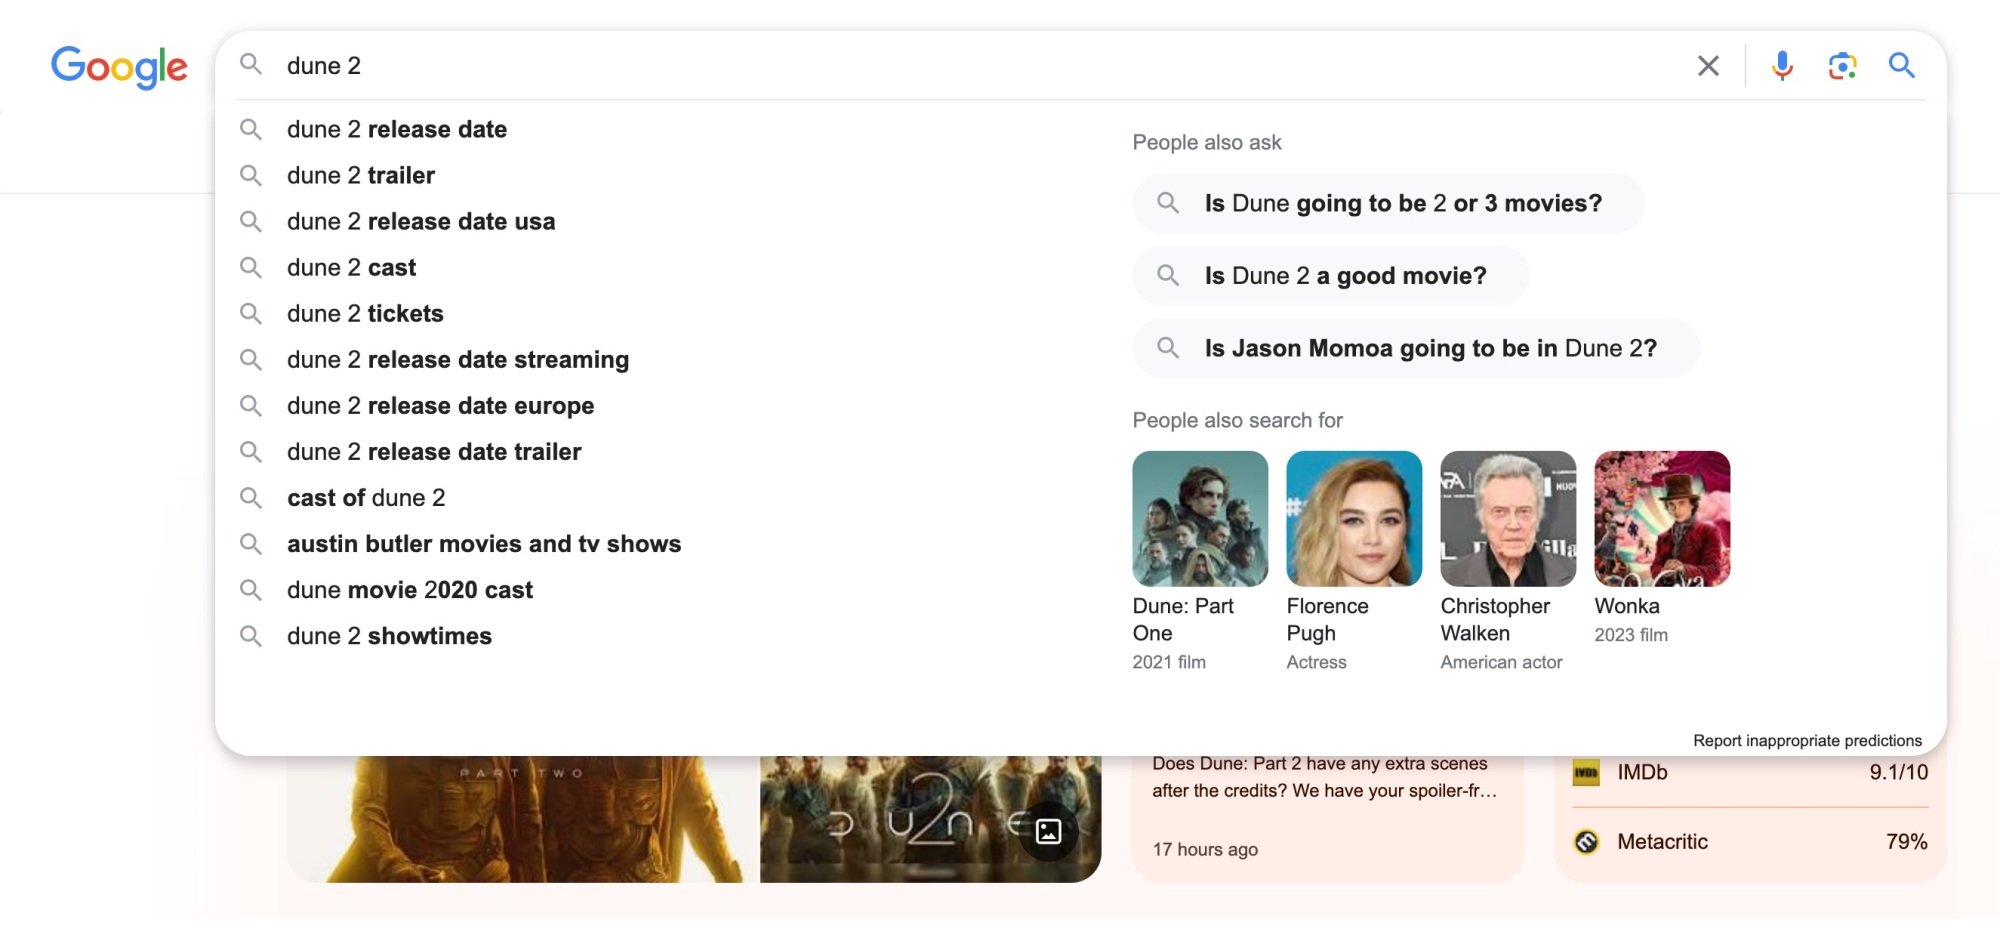 google chrome screenshot showing search suggestions about Dune 2 based on what other people are searching for